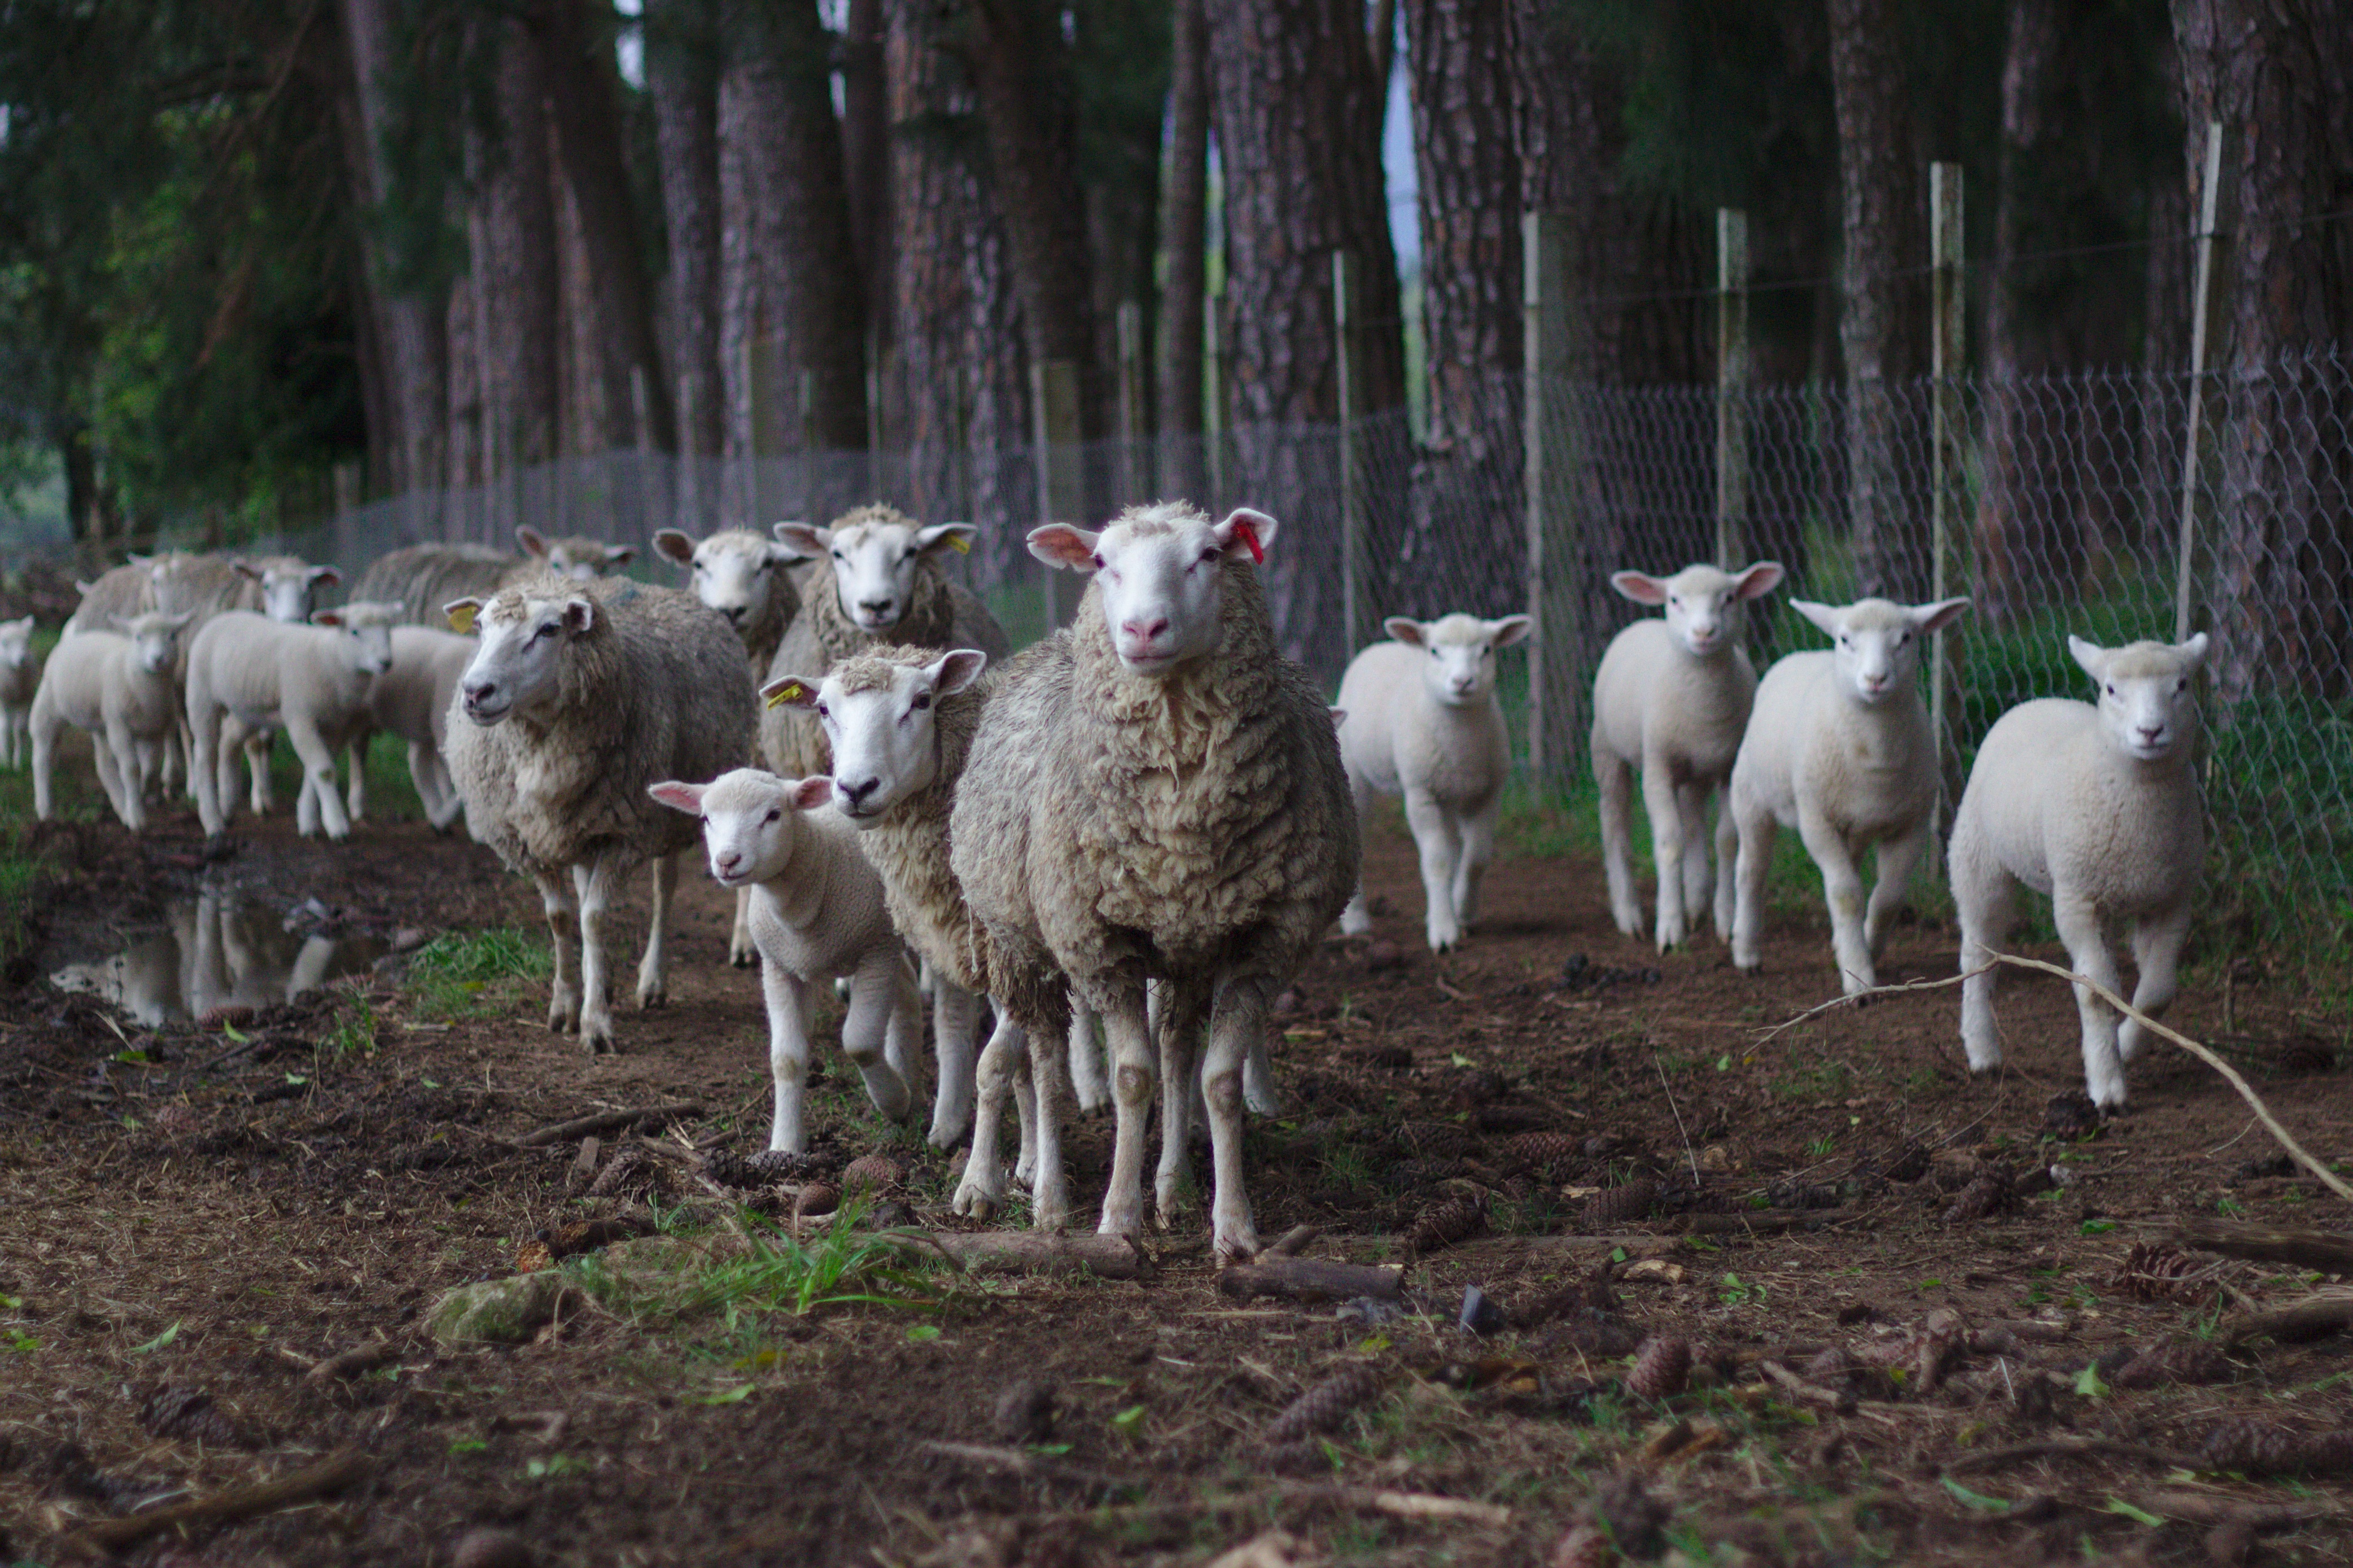 A flock of sheep on a farm stands near the woods